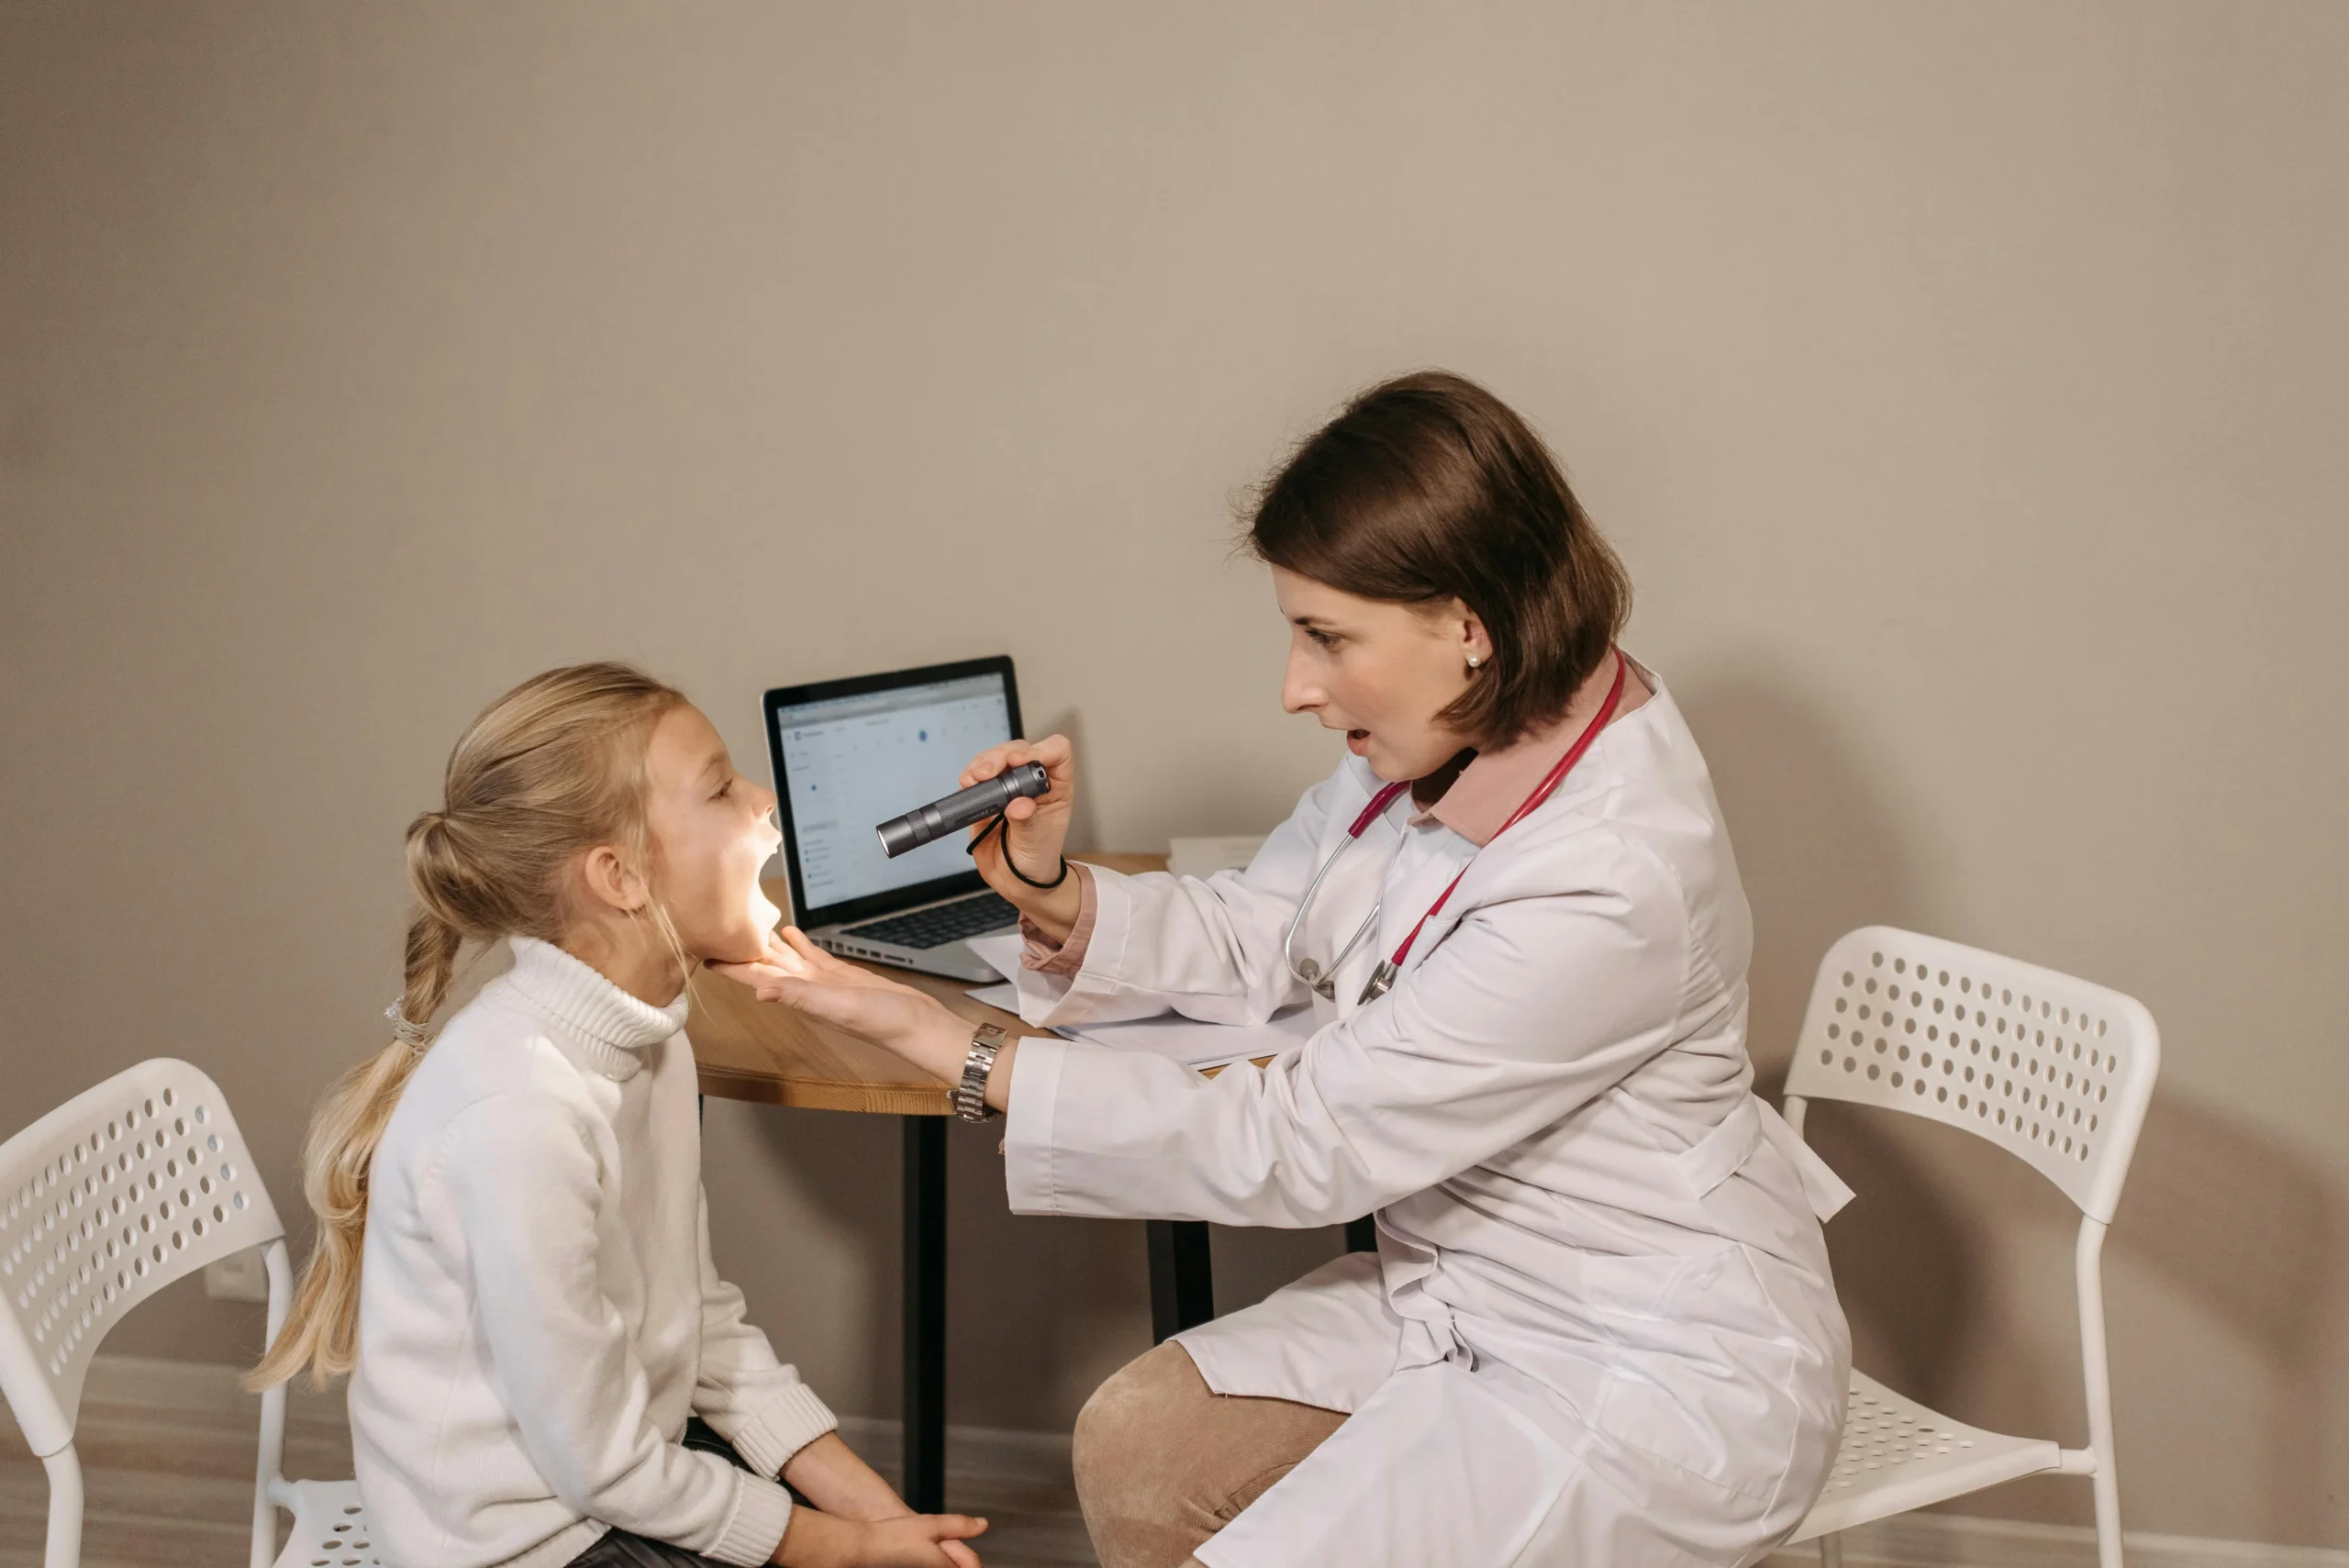 Child getting looked at by doctor 